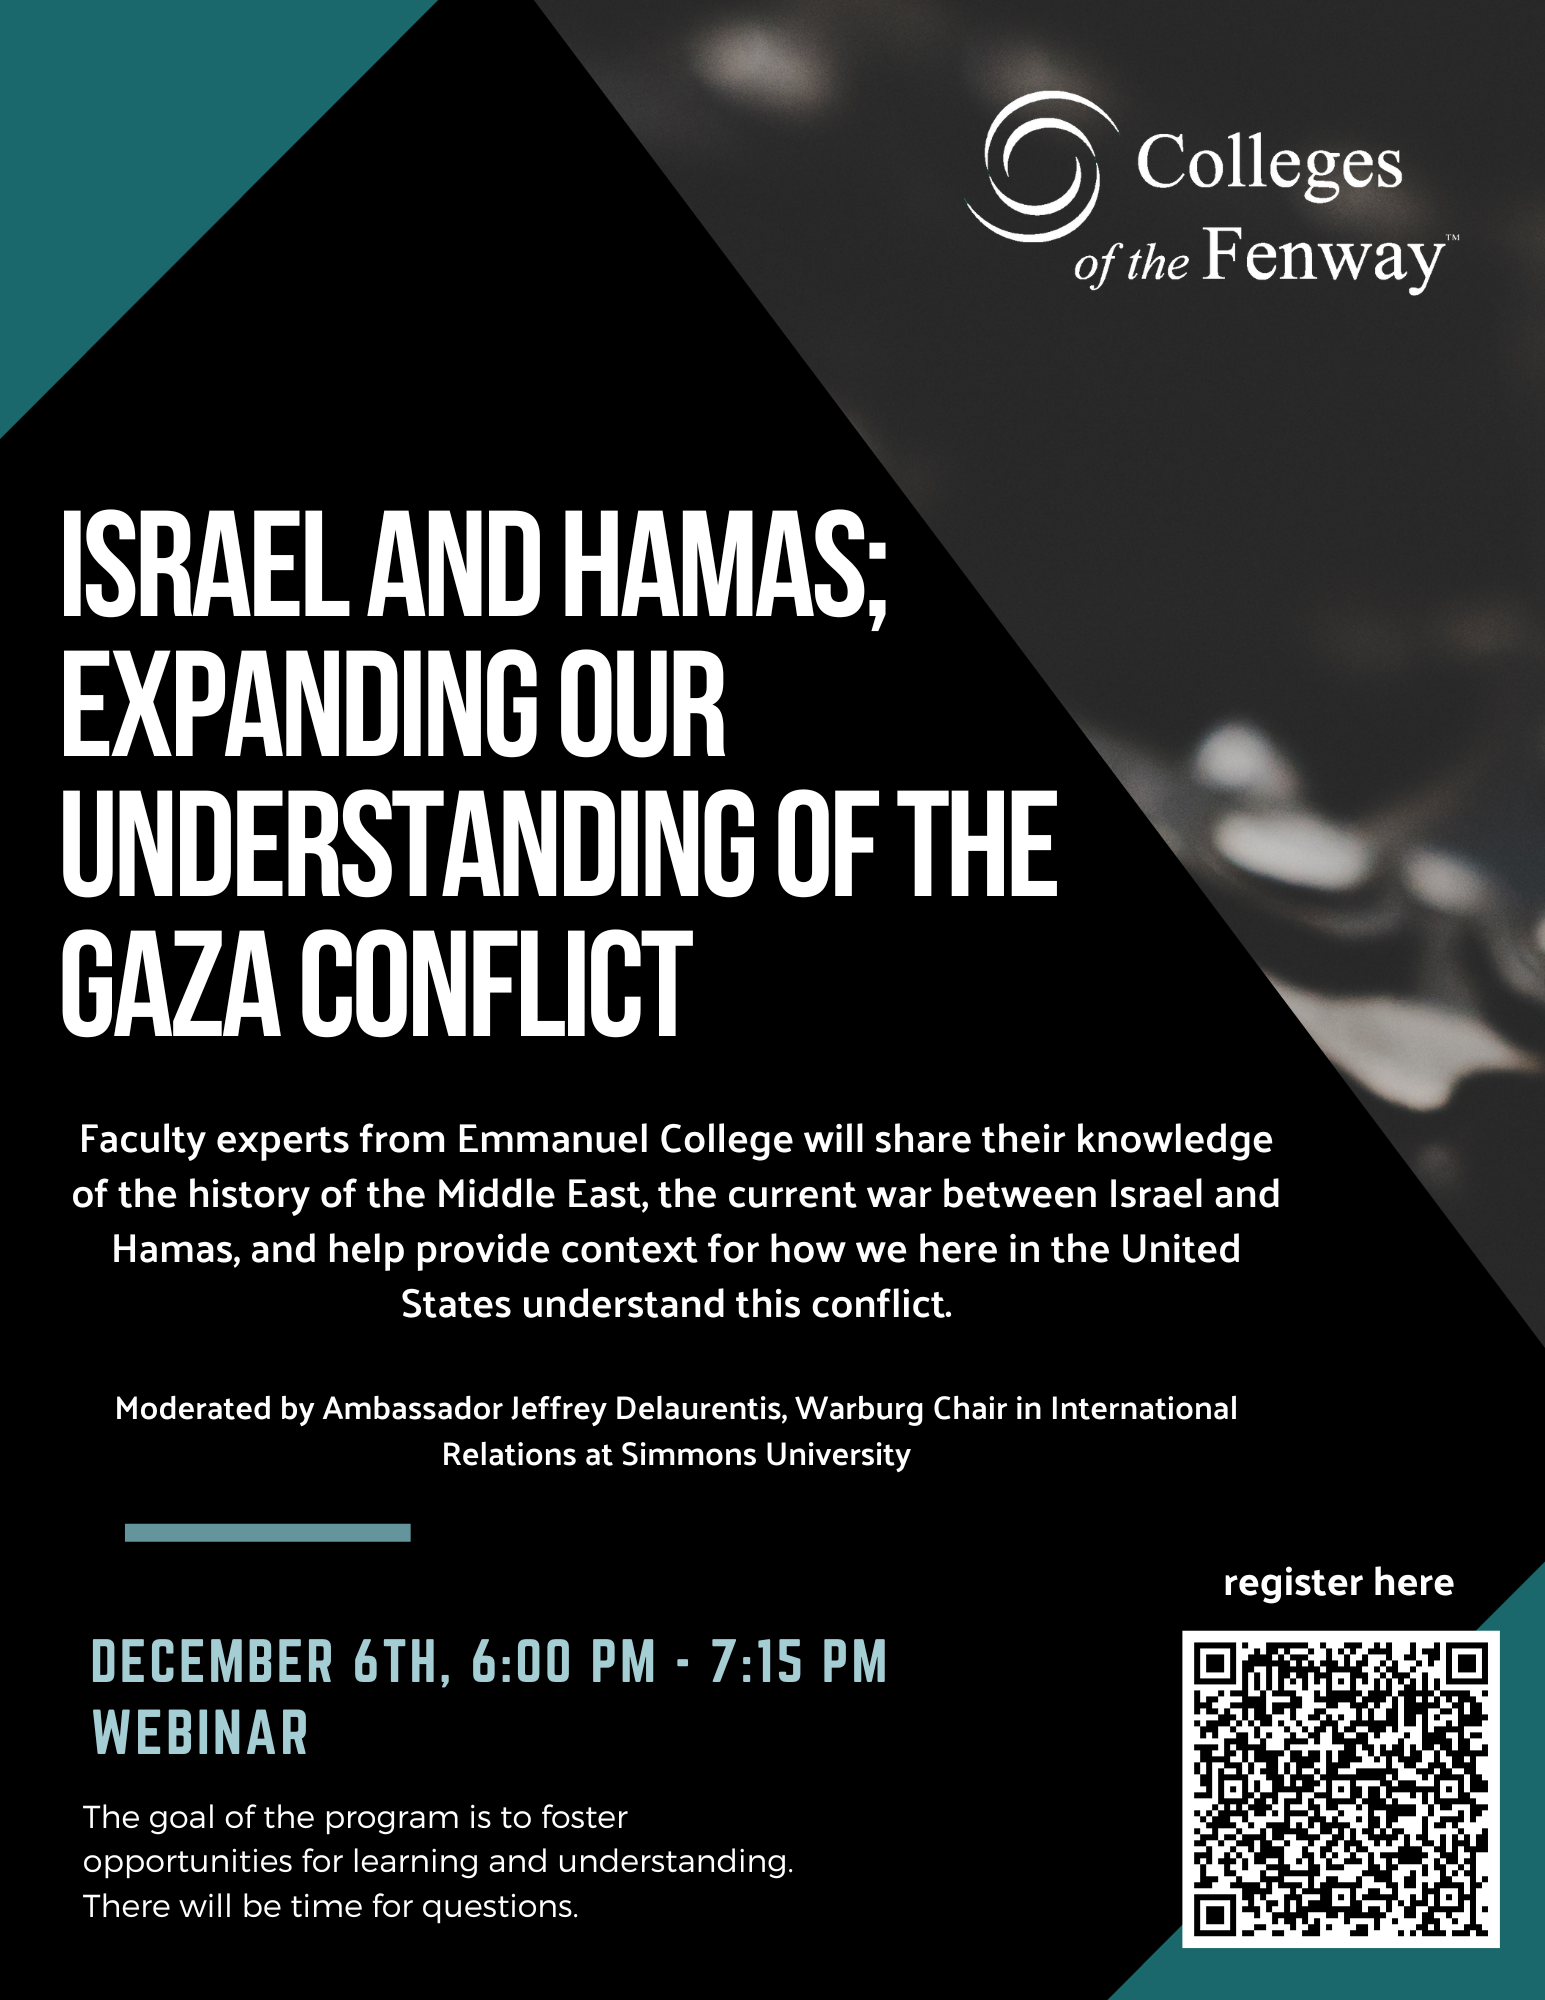 Israel and Hamas; expanding our understanding of the Gaza conflict